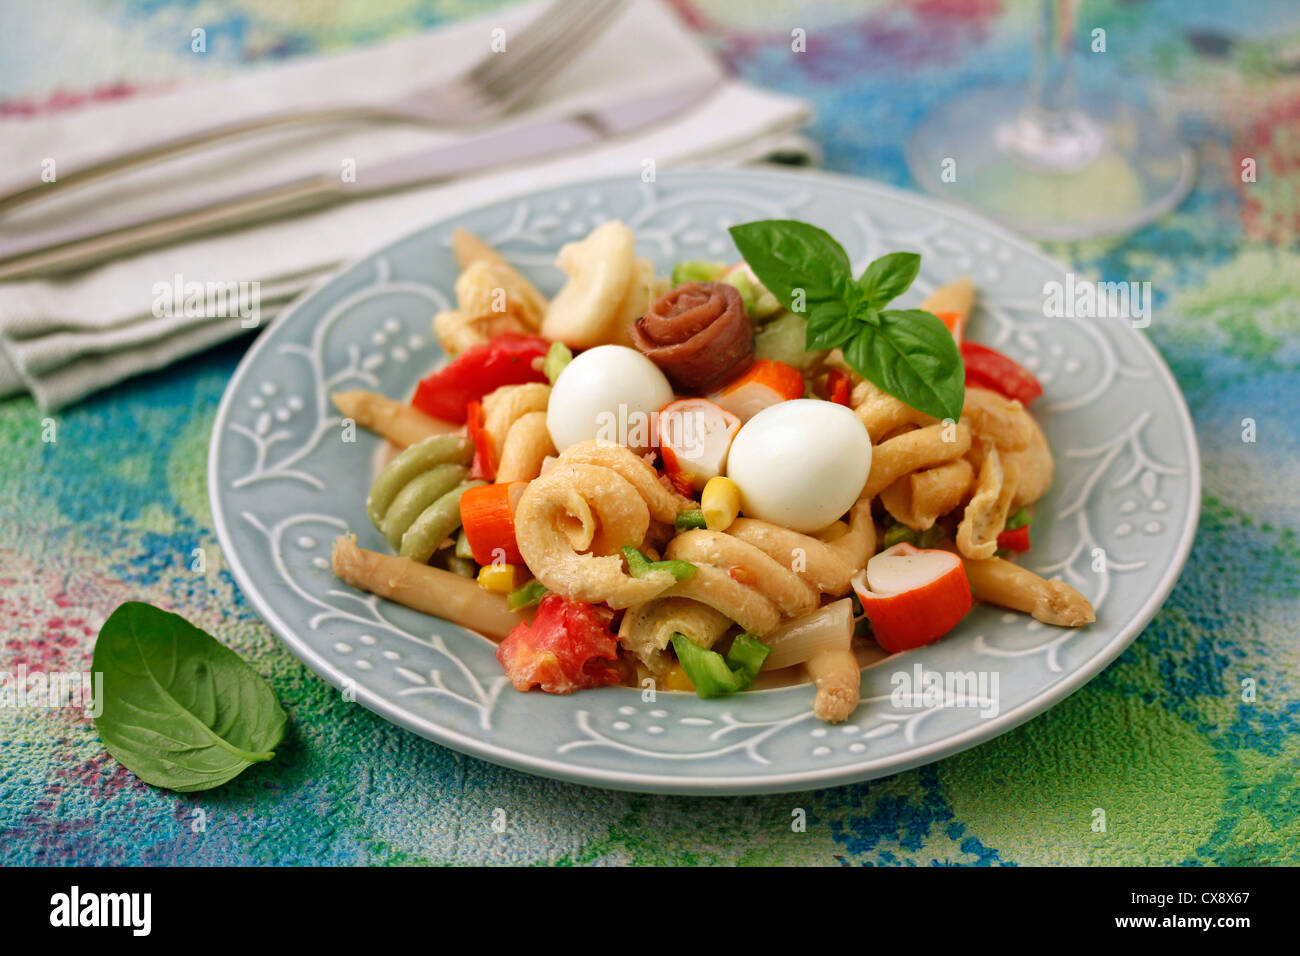 Pasta salad with surimi and eggs of quail. Recipe available. Stock Photo